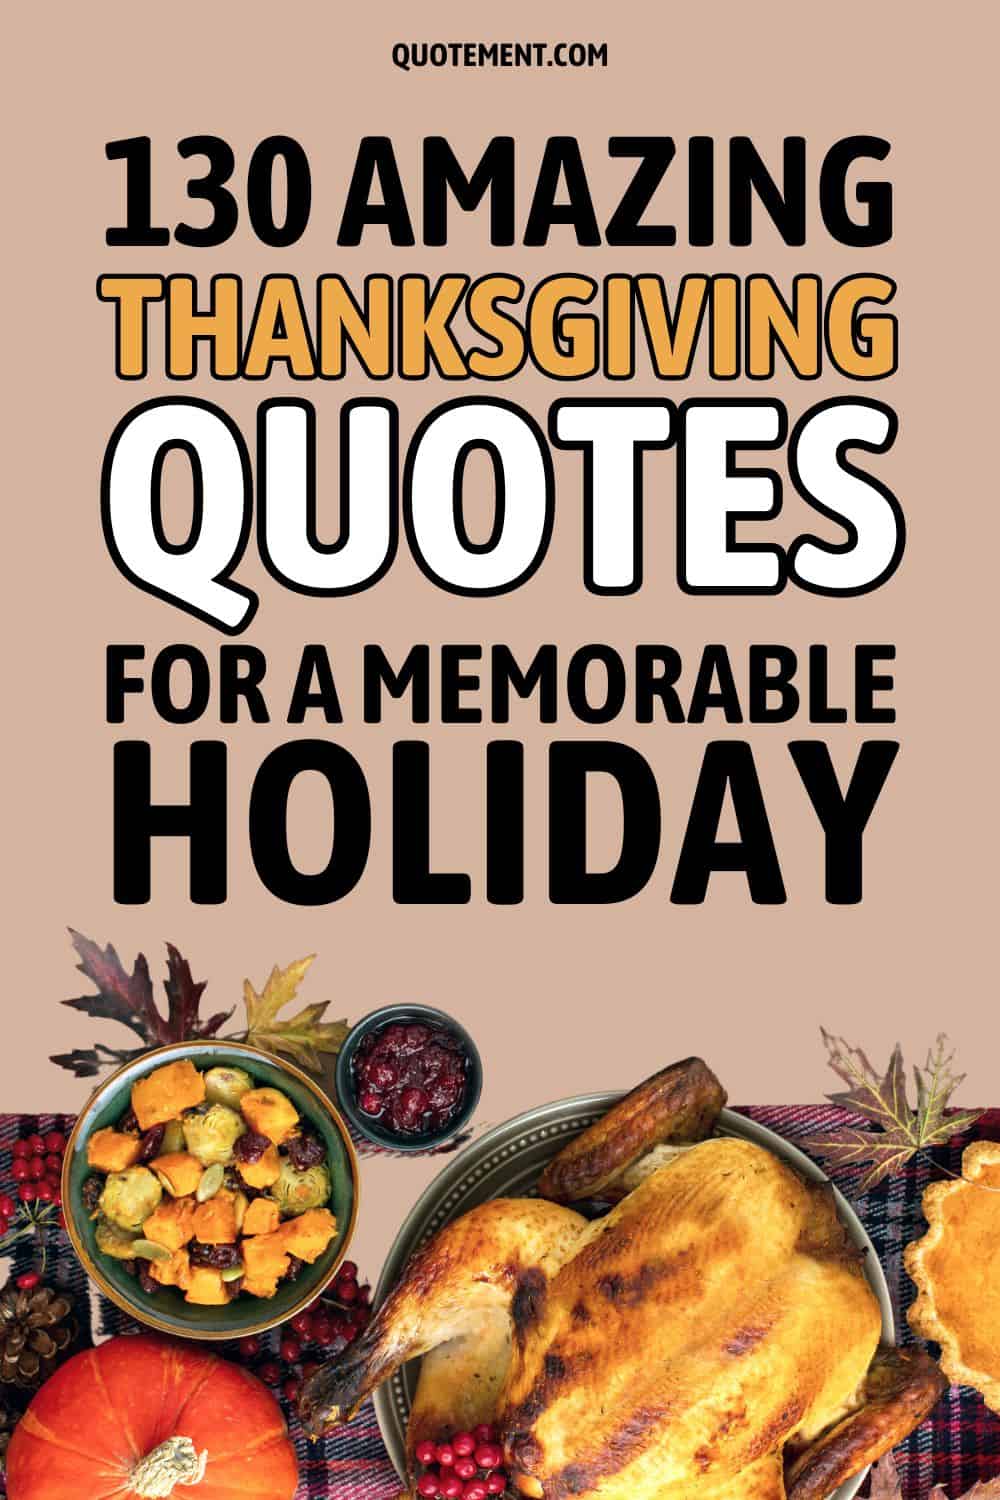 130 Amazing Thanksgiving Quotes For A Memorable Holiday